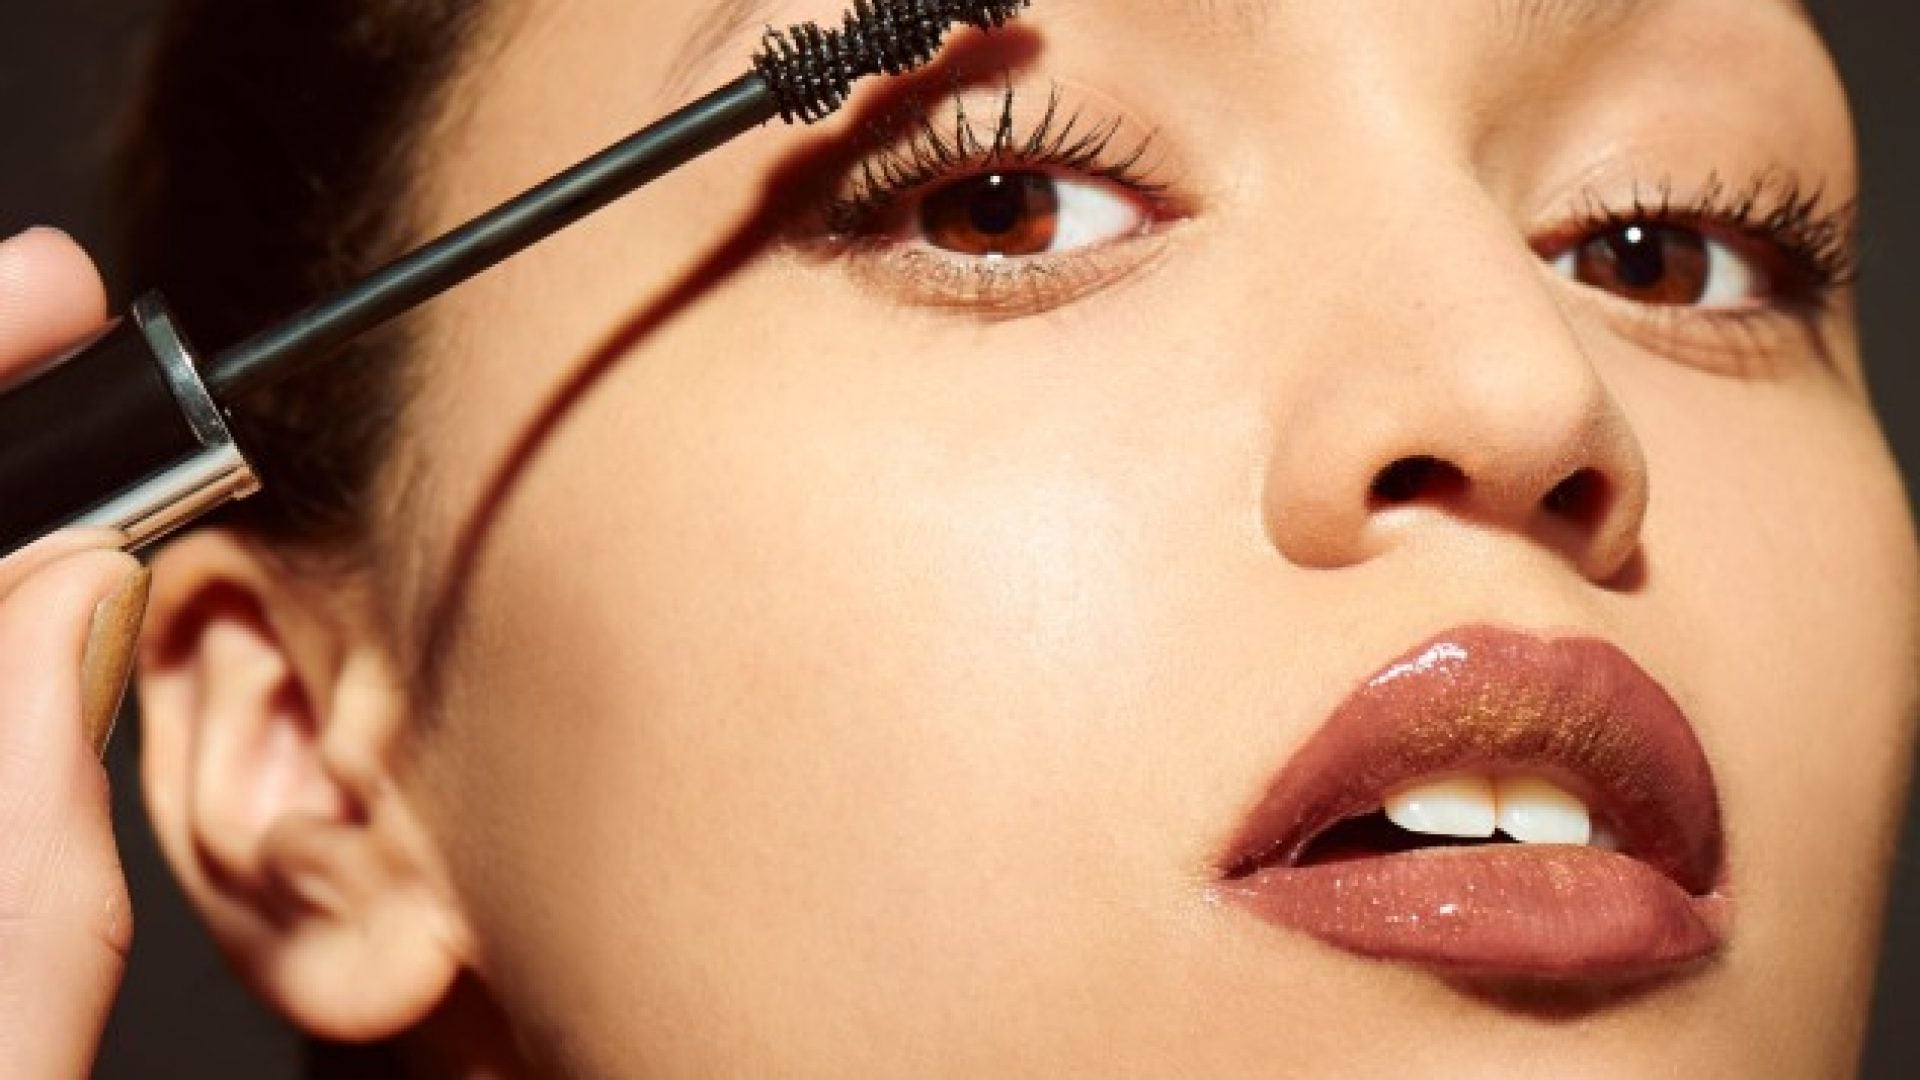 Save Your Coins, Sis! Celebrate National Lash Day With These Sales